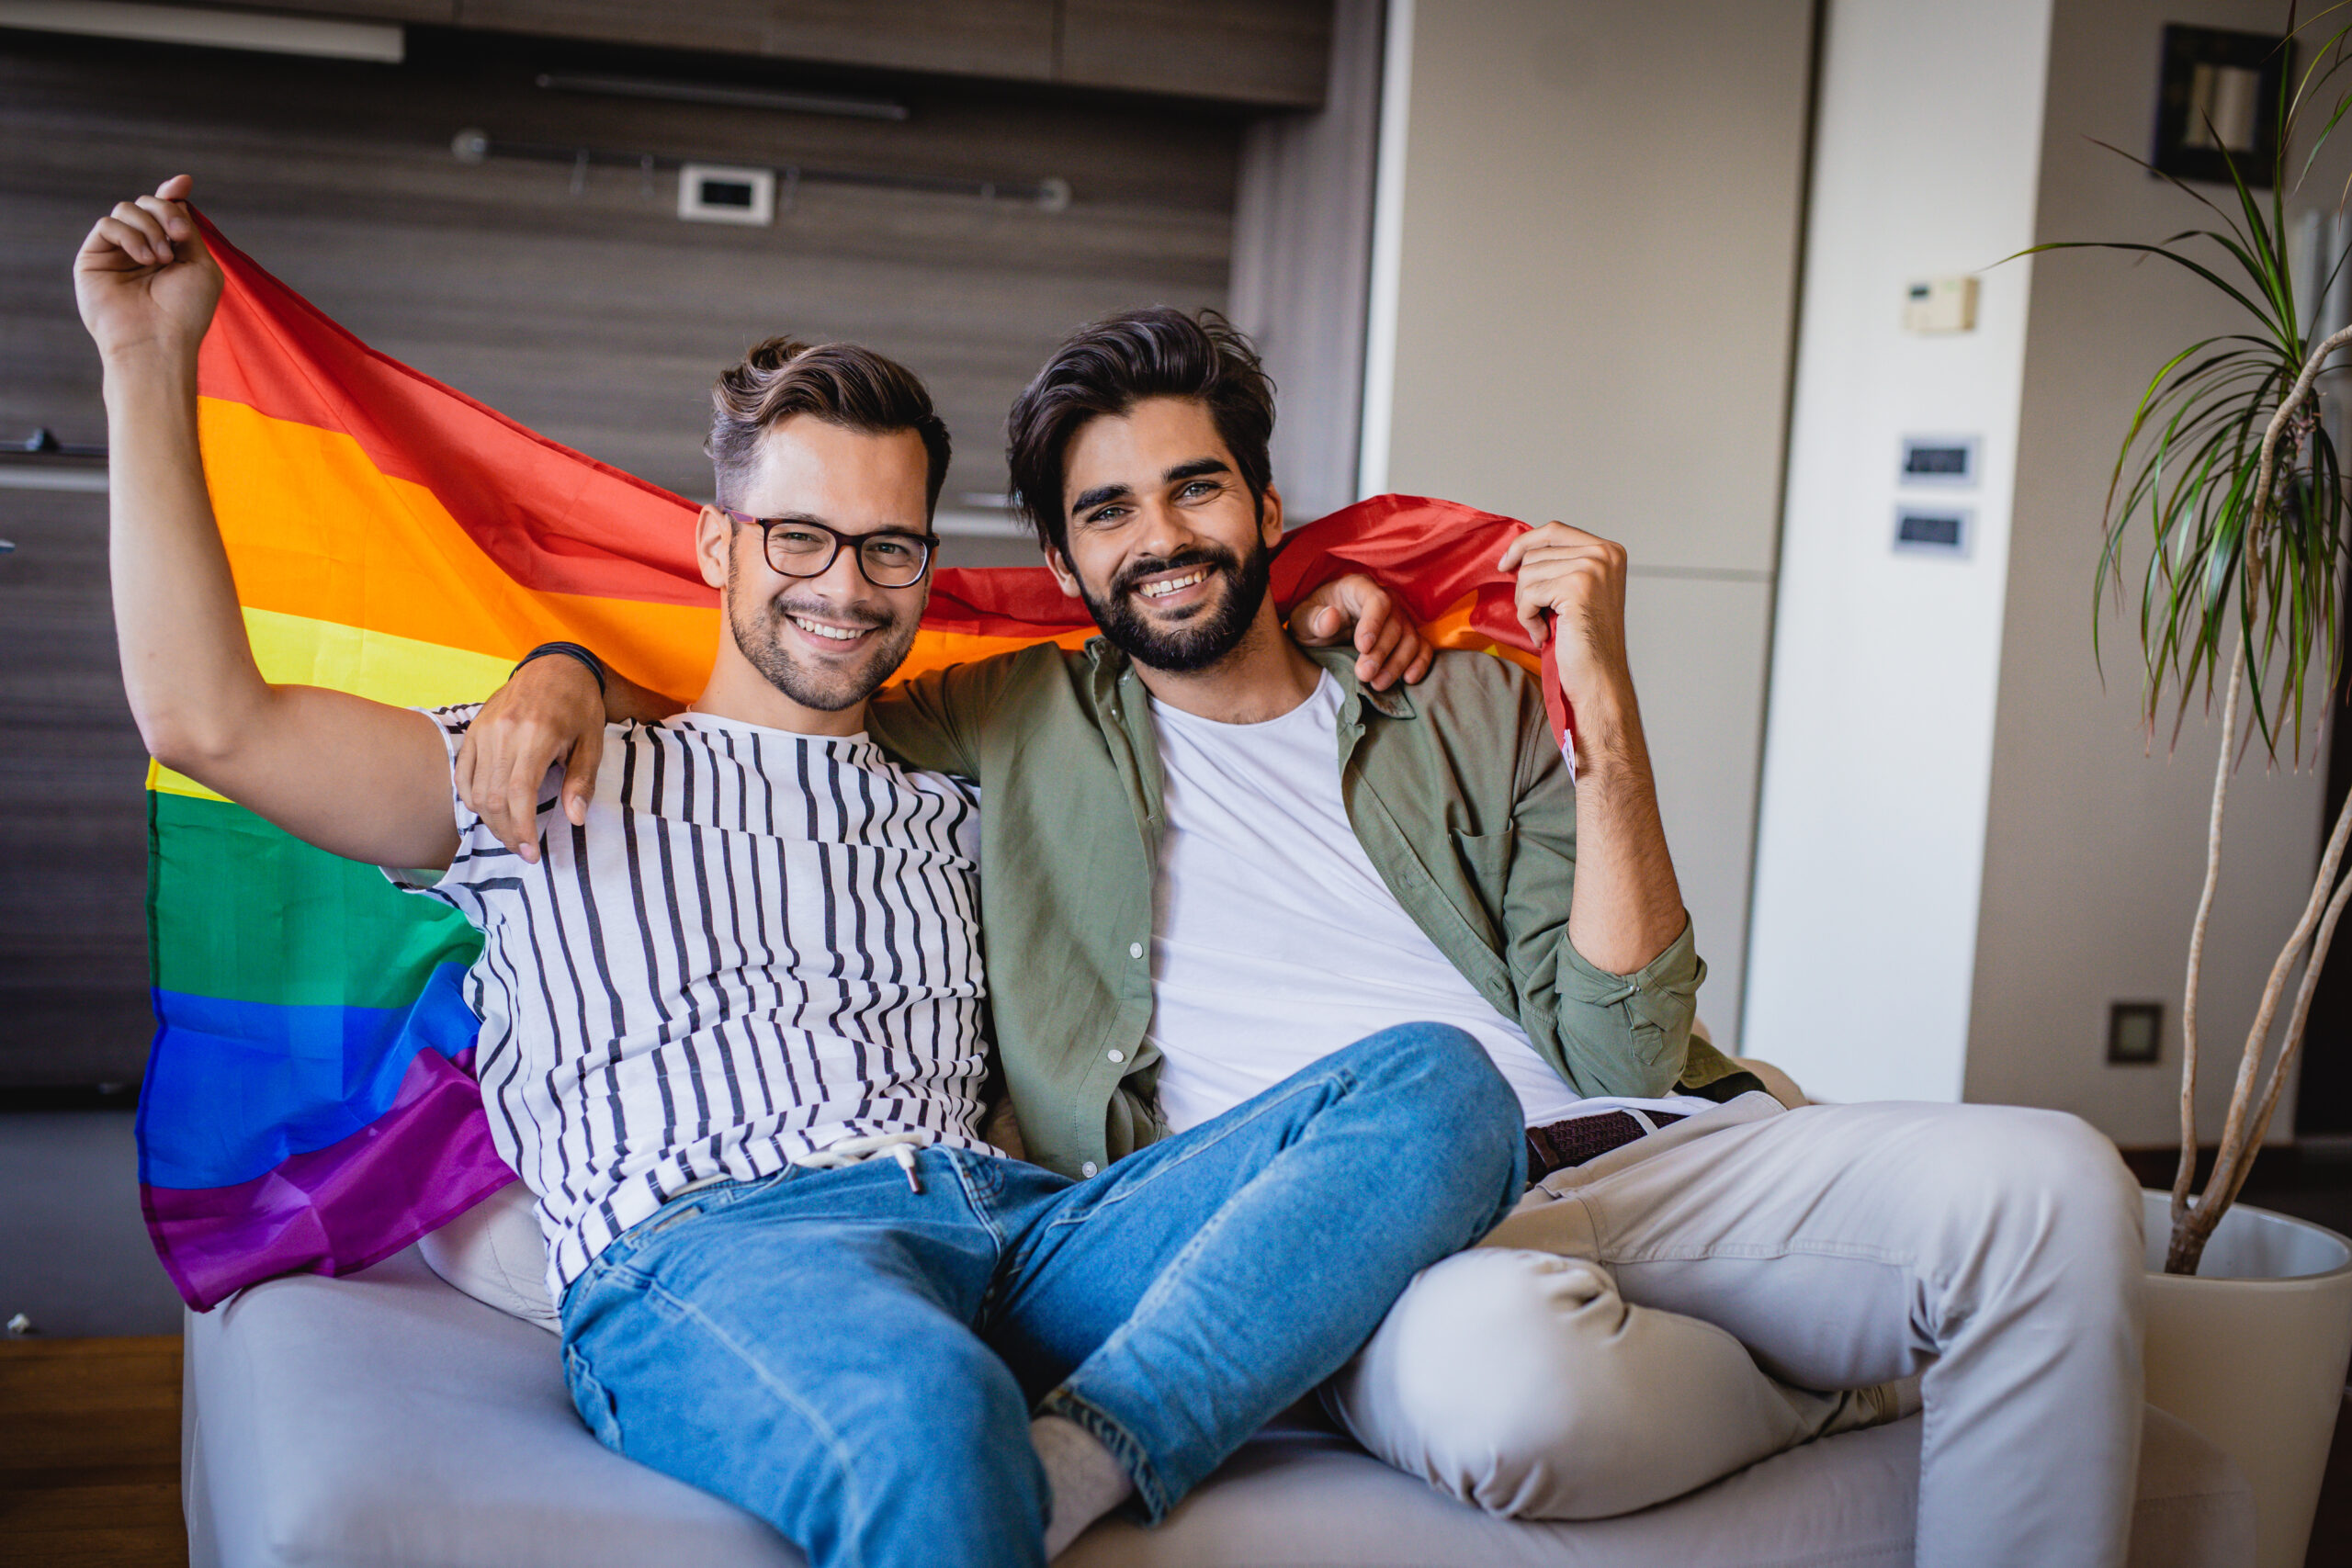 Two people on couch with rainbow flag